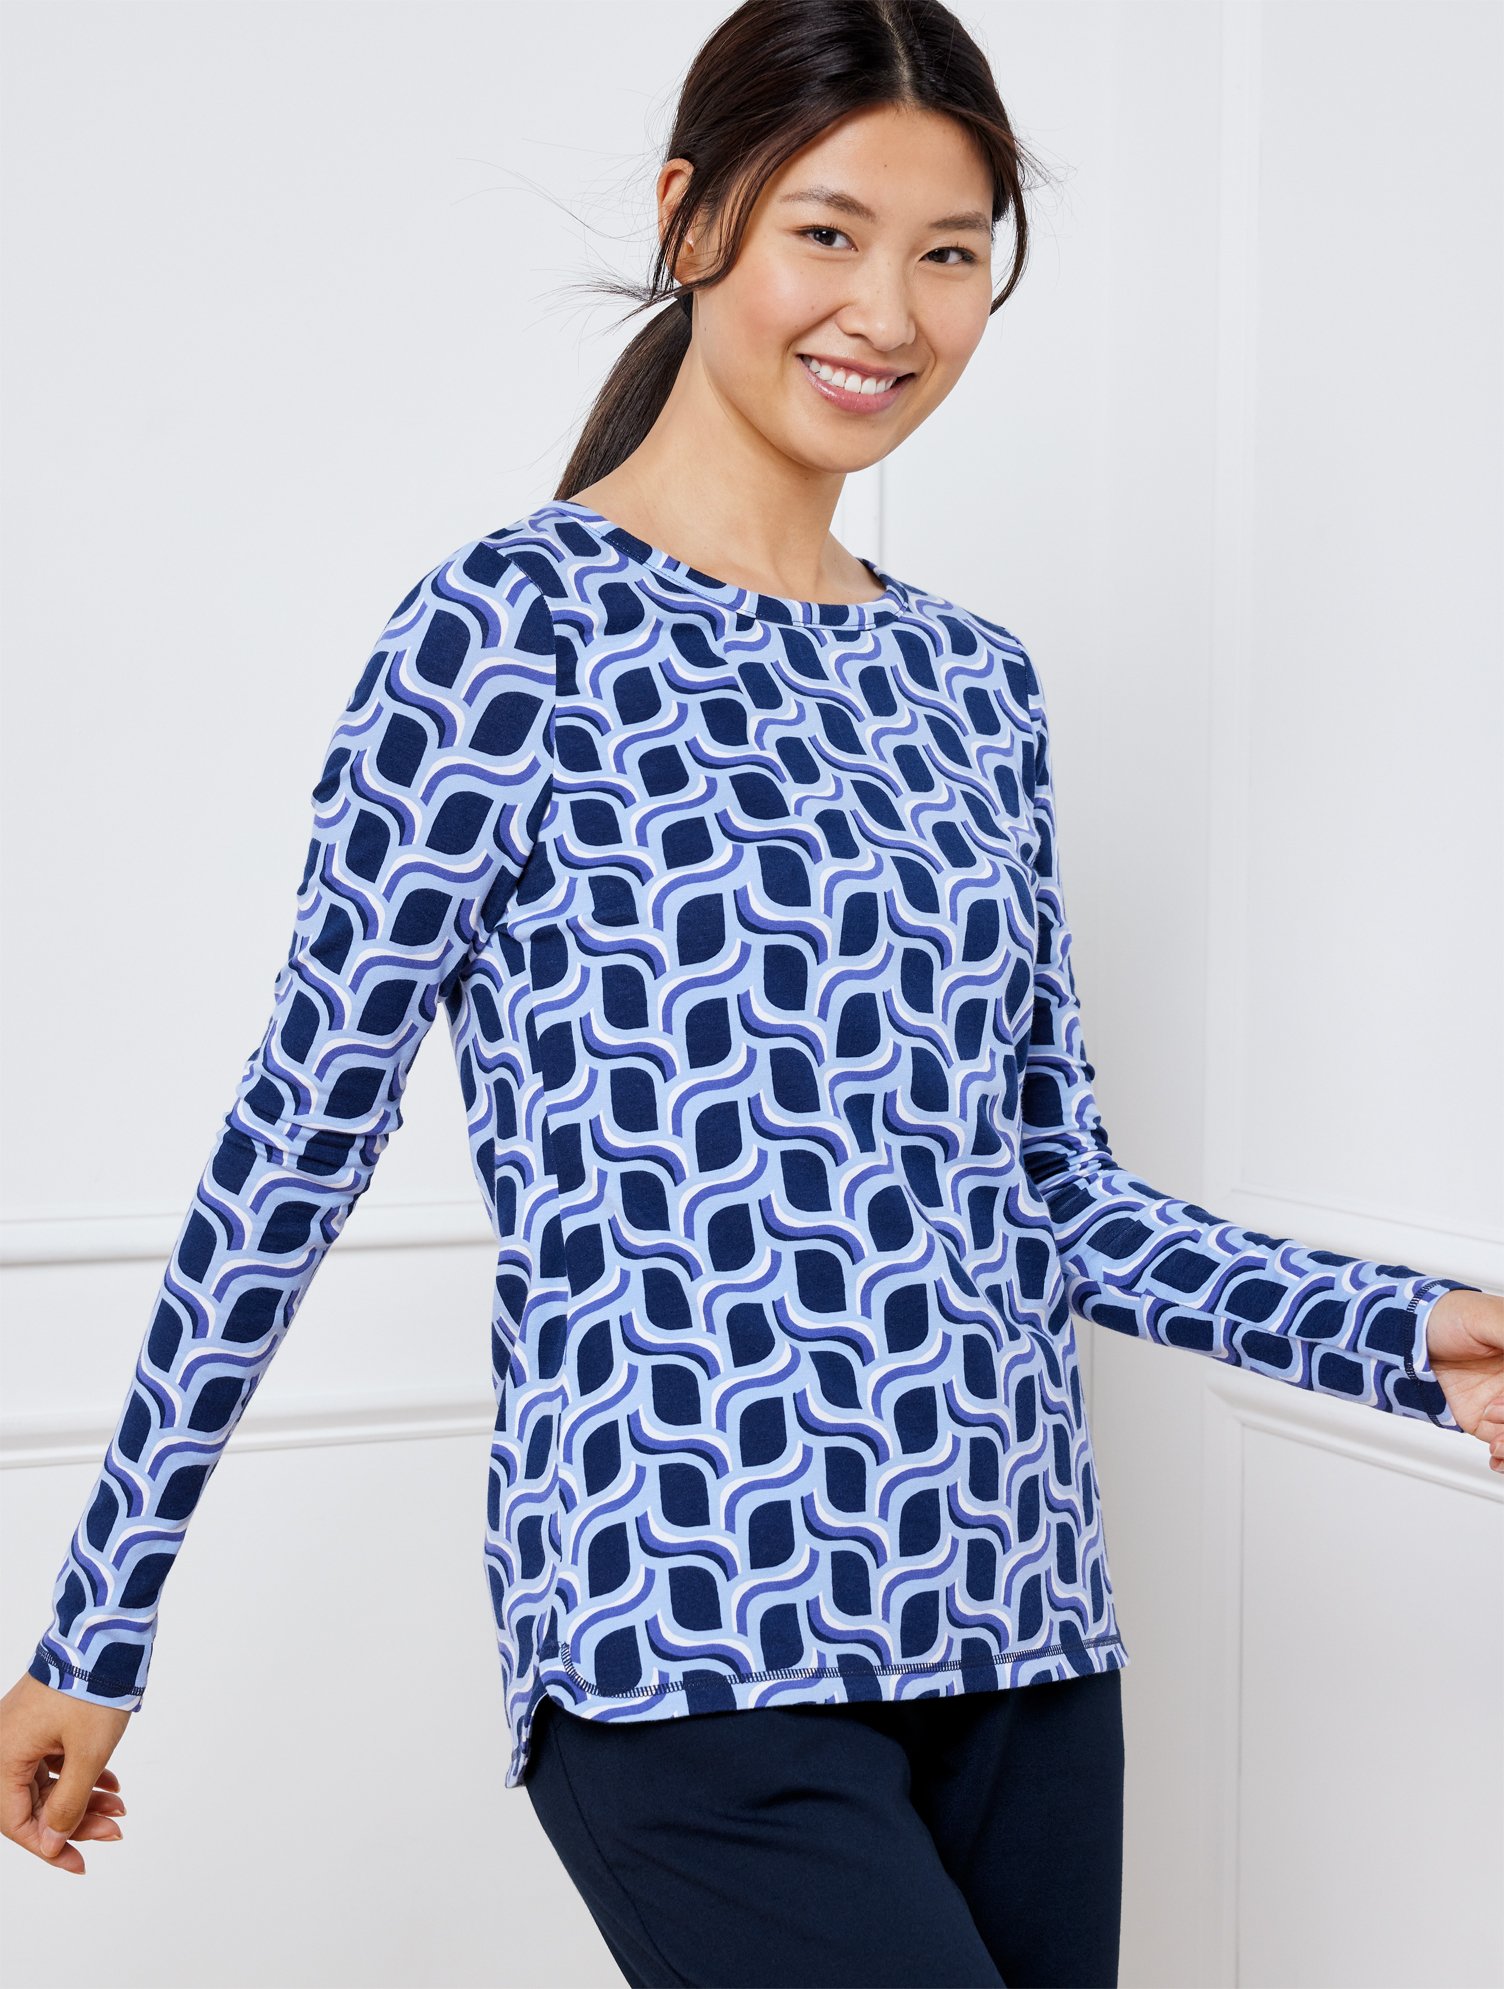 Talbots Petite - Supersoft Jersey Scoop Neck T-shirt - Wavy Swirls - Ink/blue Sky - Large  In Ink,blue Sky